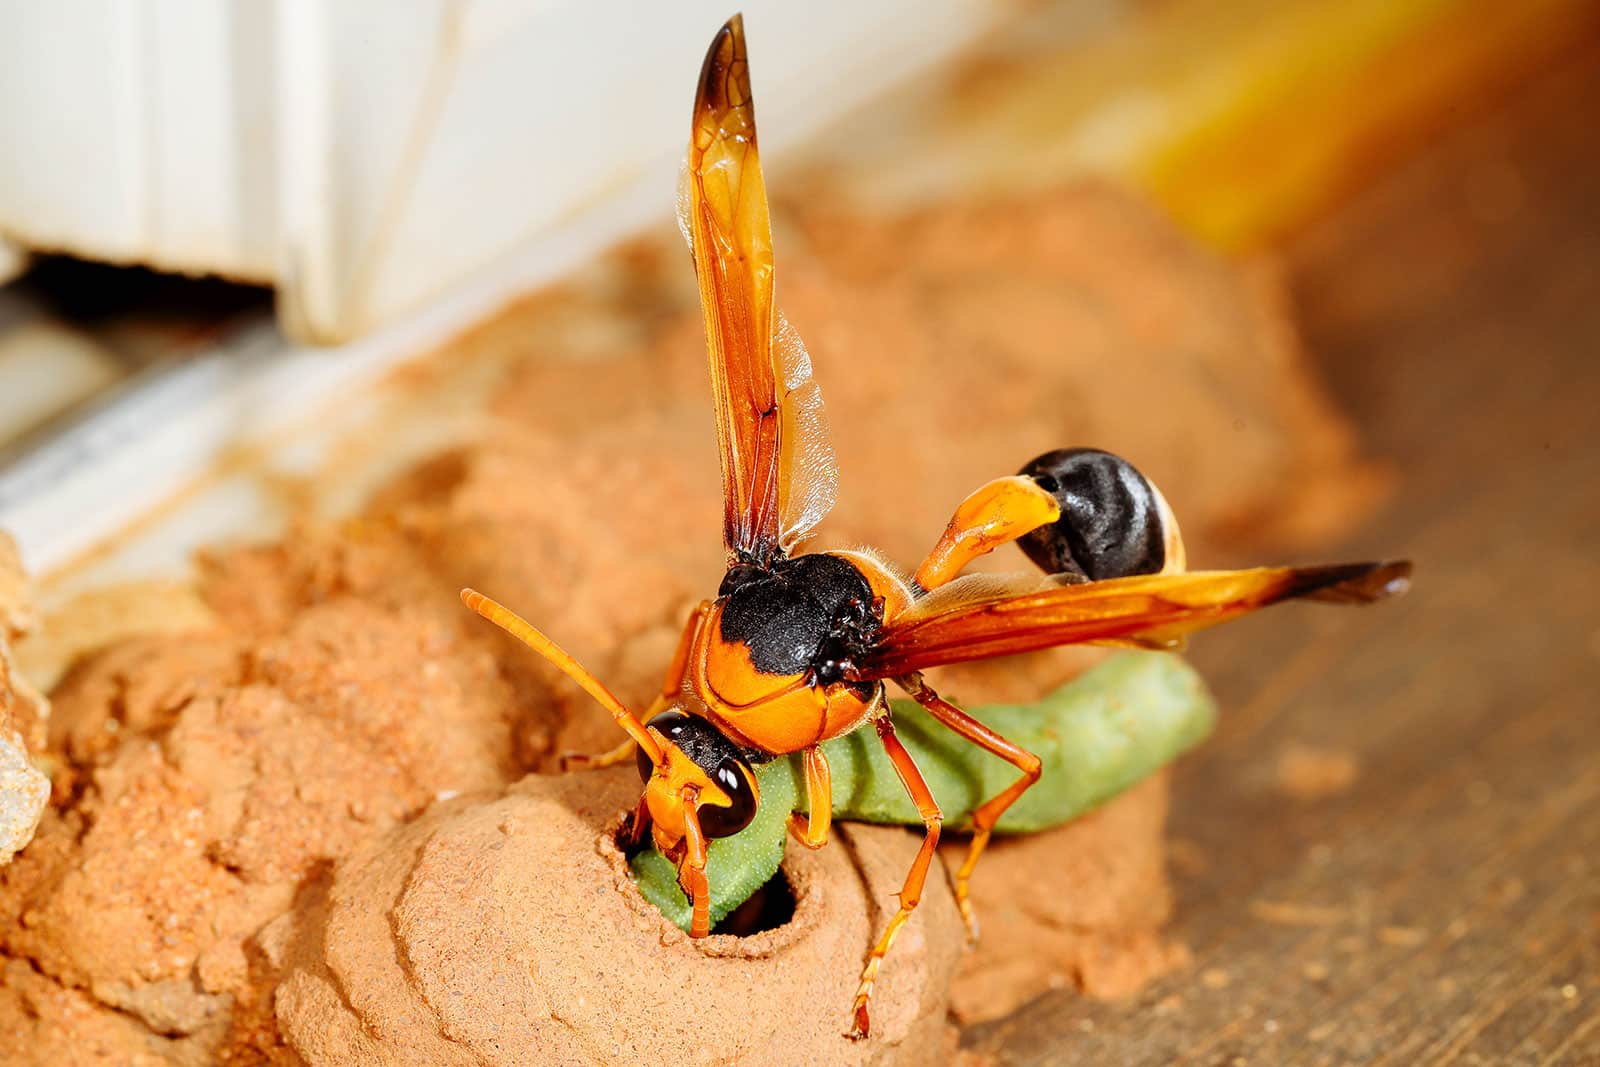 Potter wasp putting a caterpillar in a mud nest